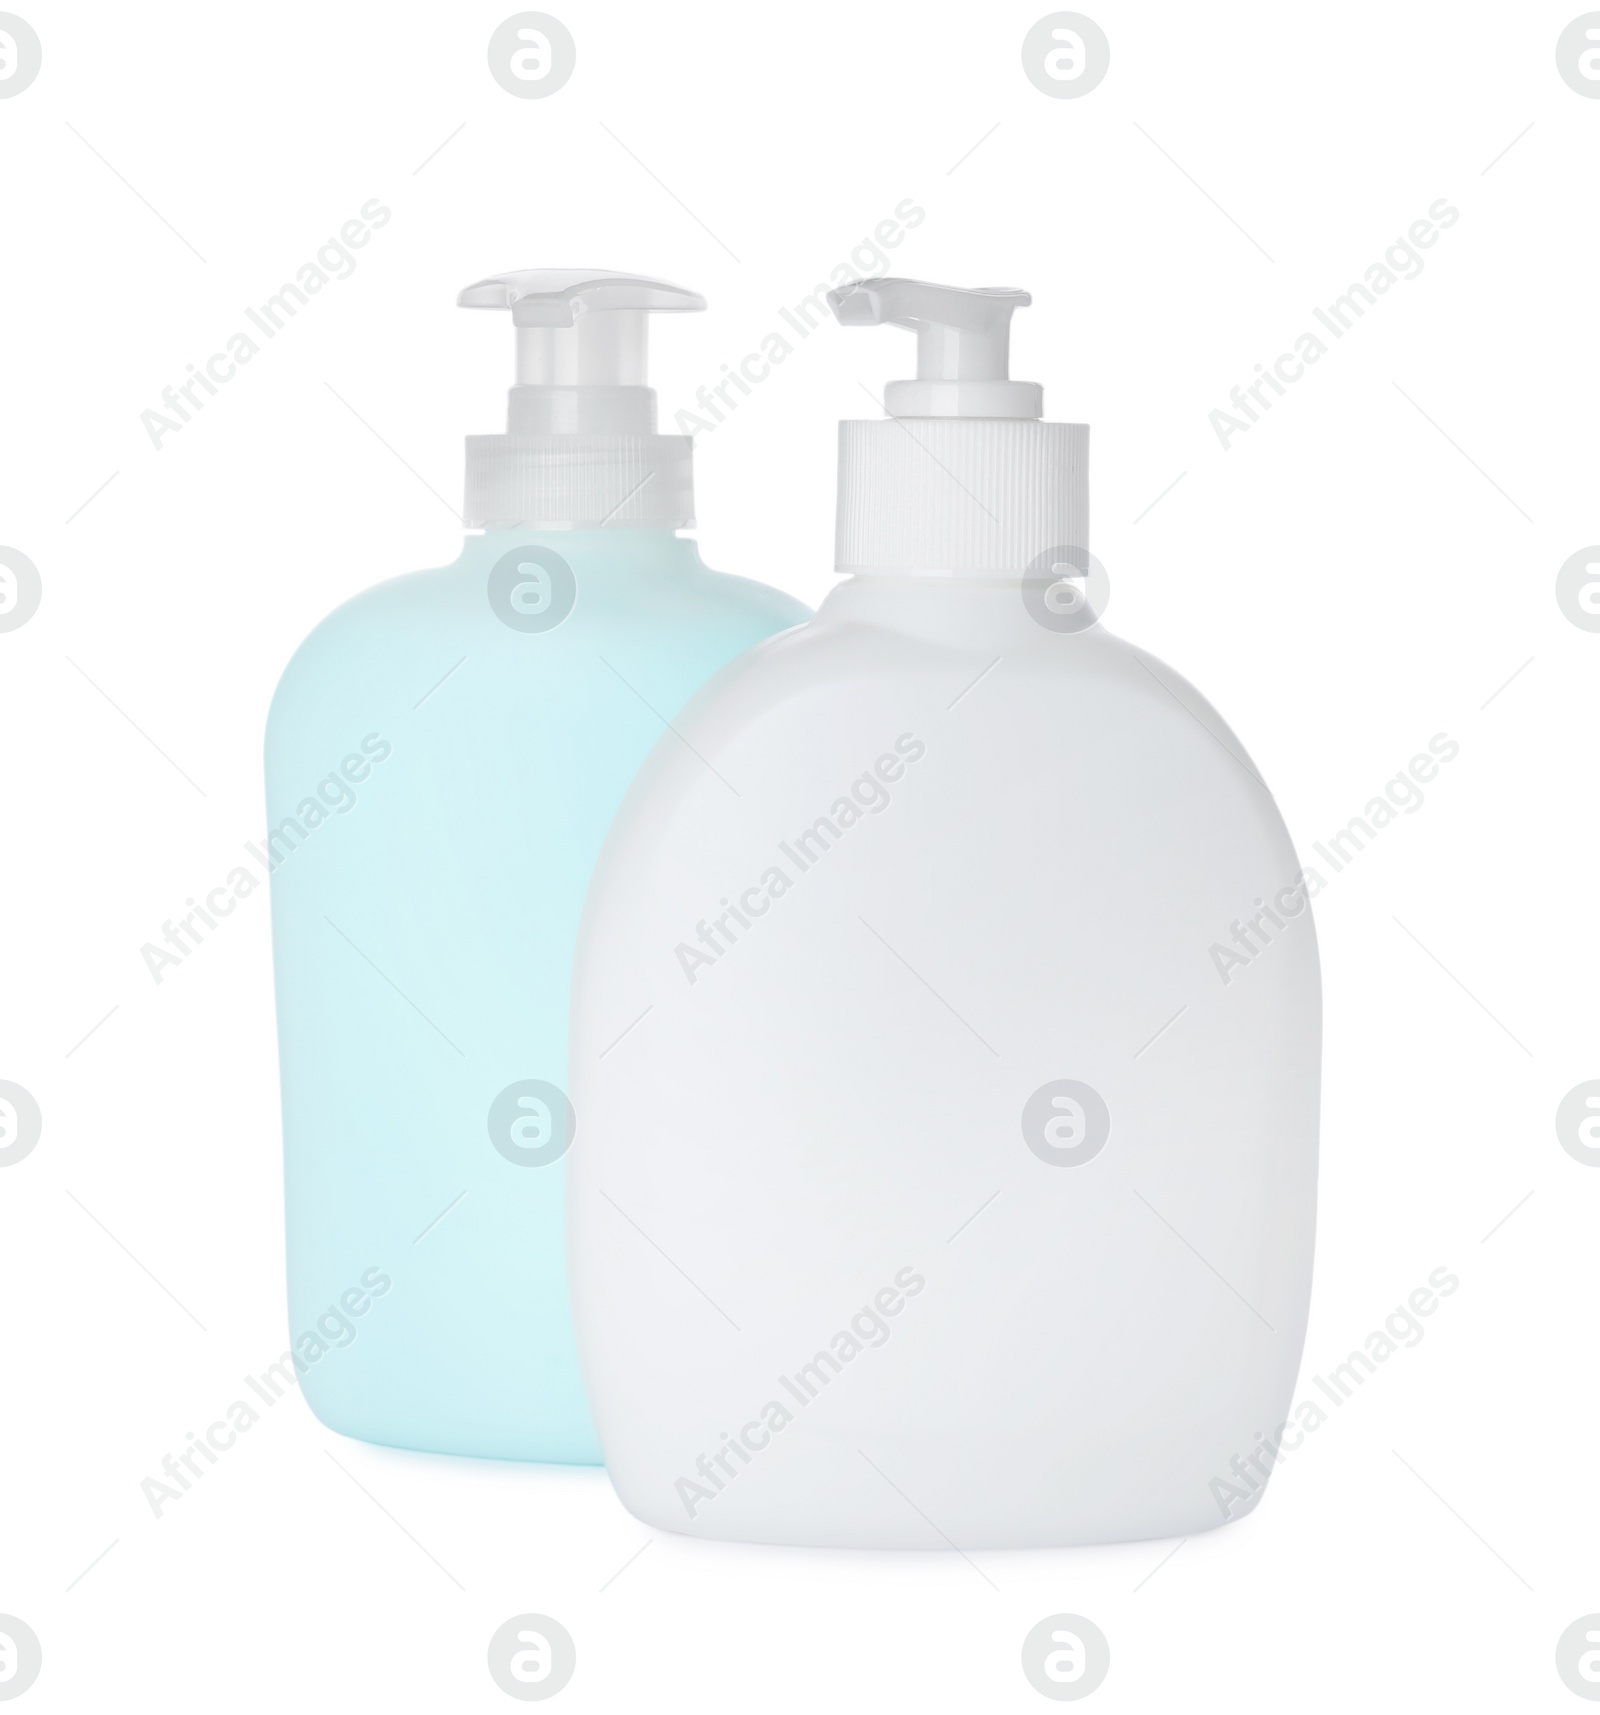 Photo of Dispensers of liquid soap on white background